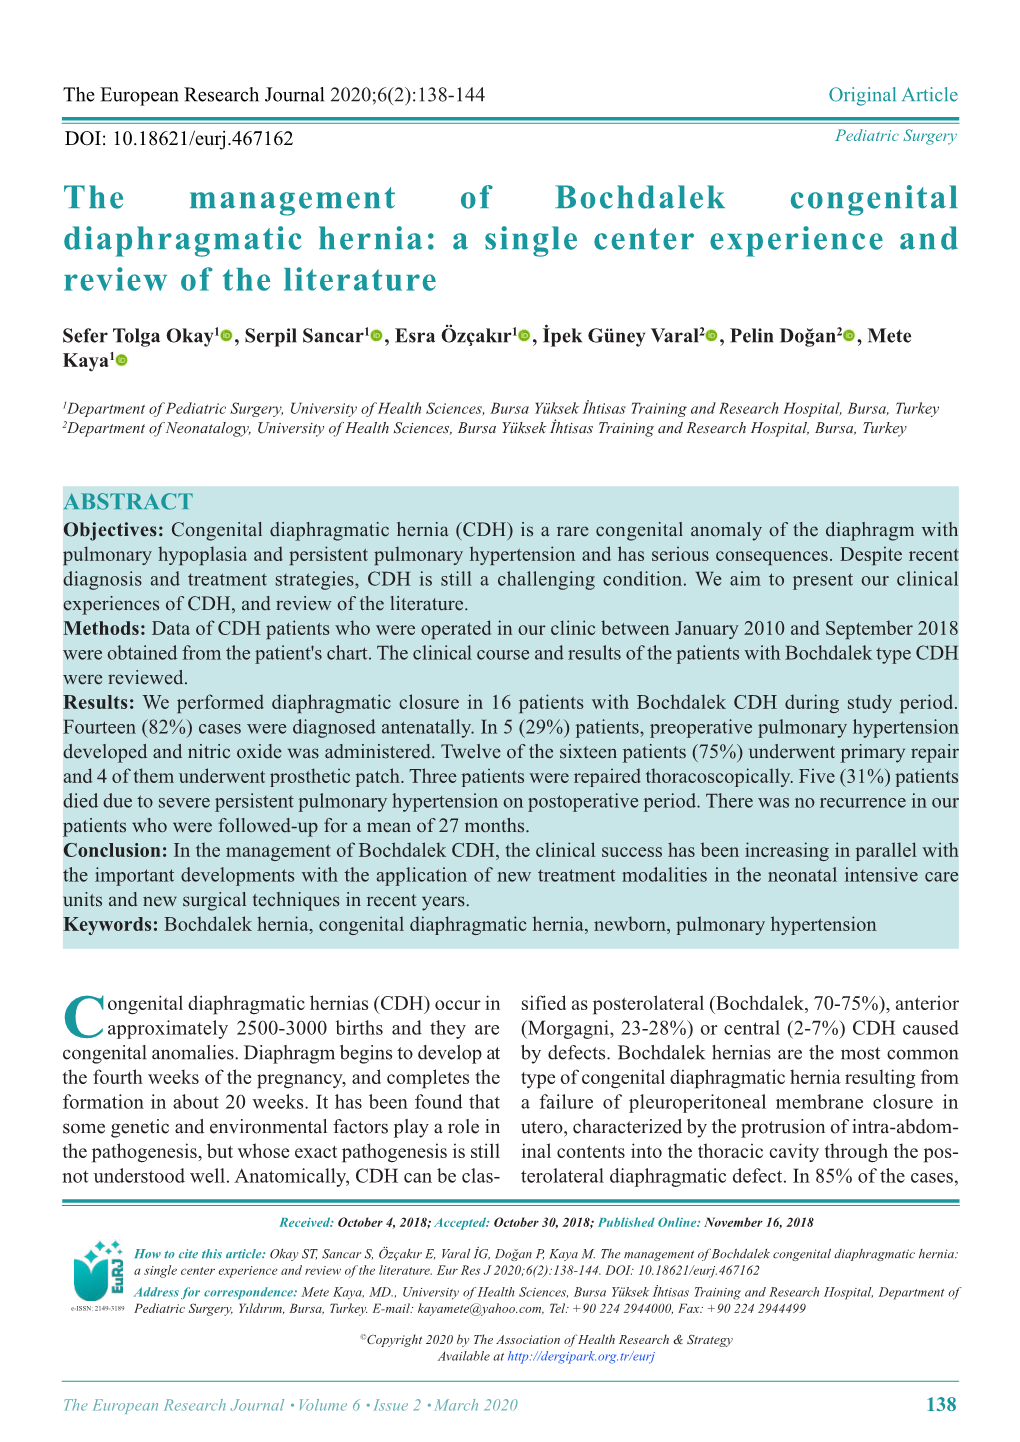 The Management of Bochdalek Congenital Diaphragmatic Hernia: a Single Center Experience and Review of the Literature